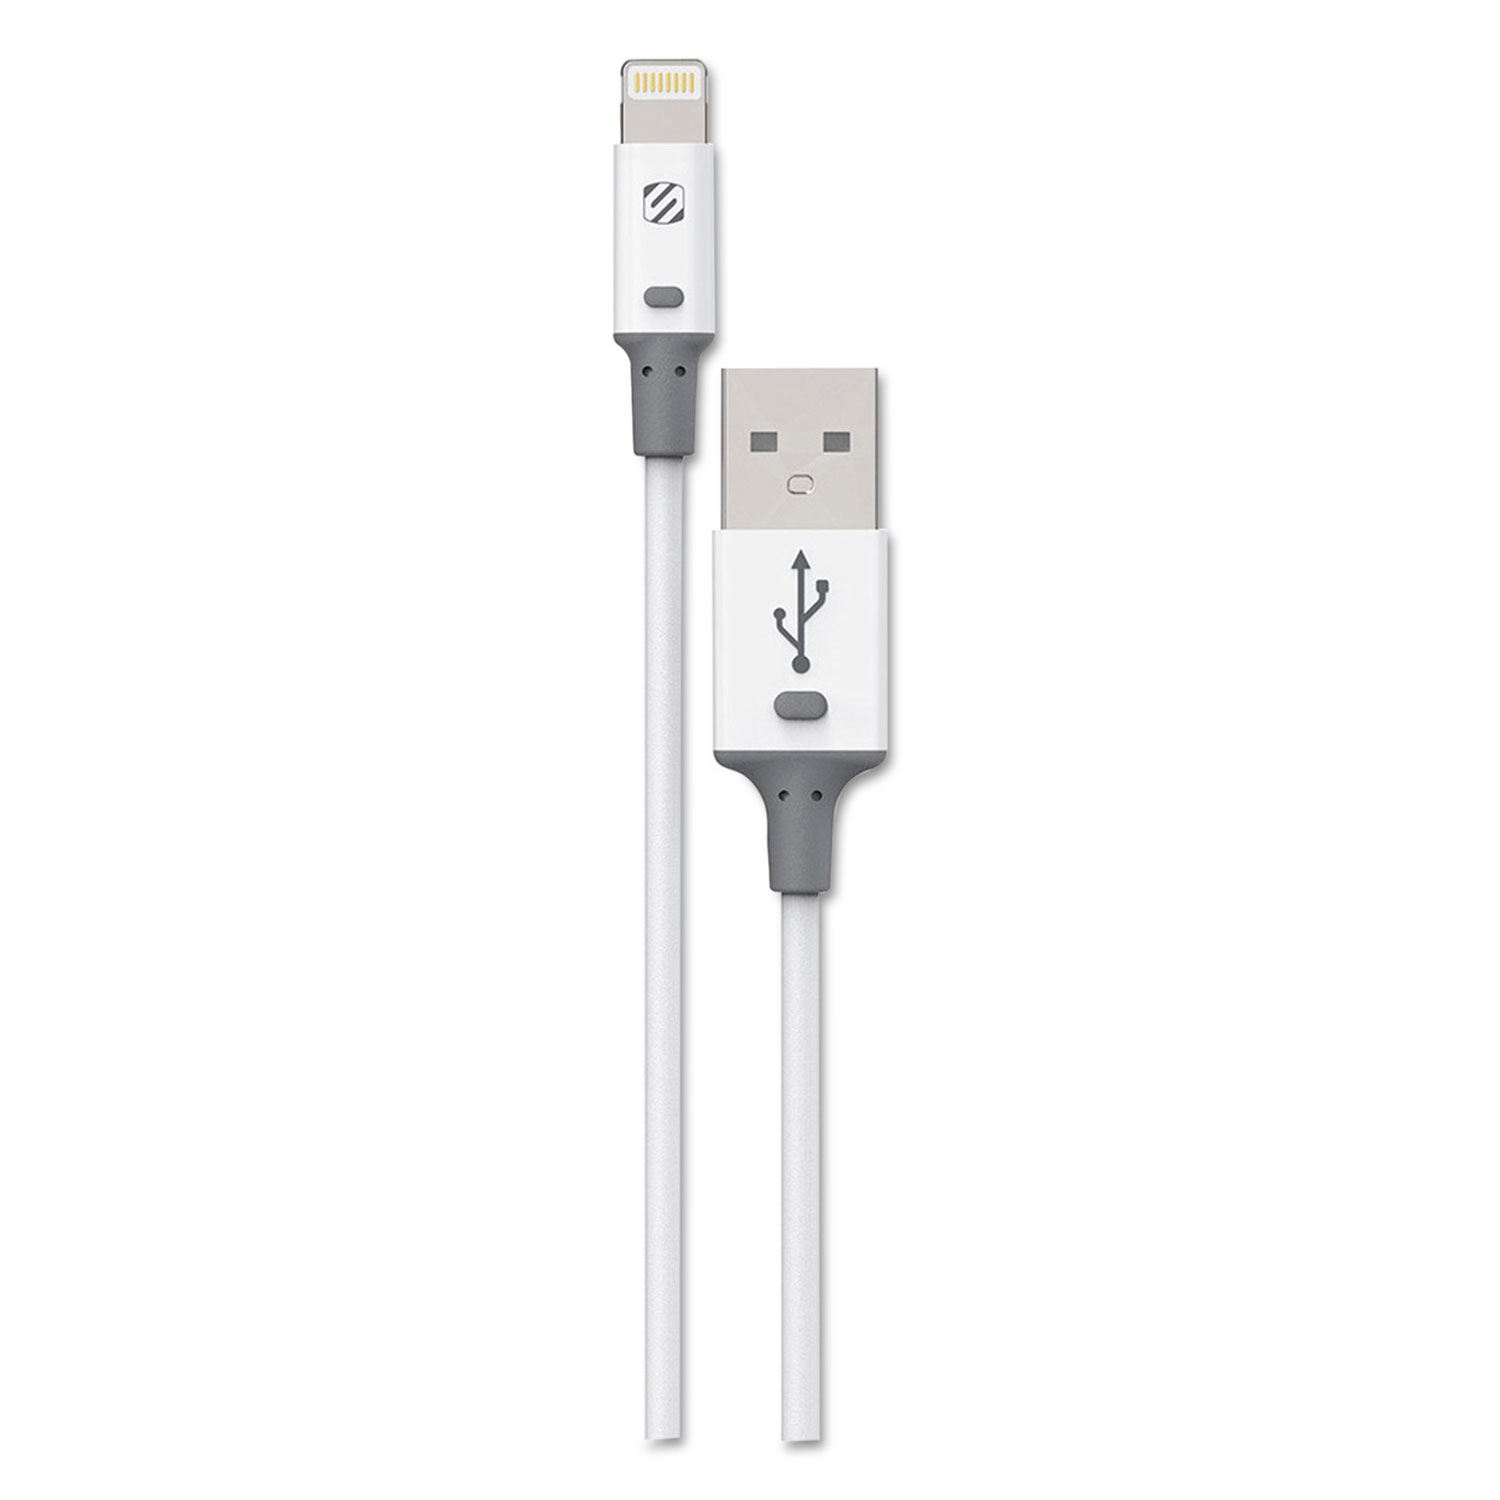 smartSTRIKE II Charge & Sync Cable for Lightning USB Devices, White